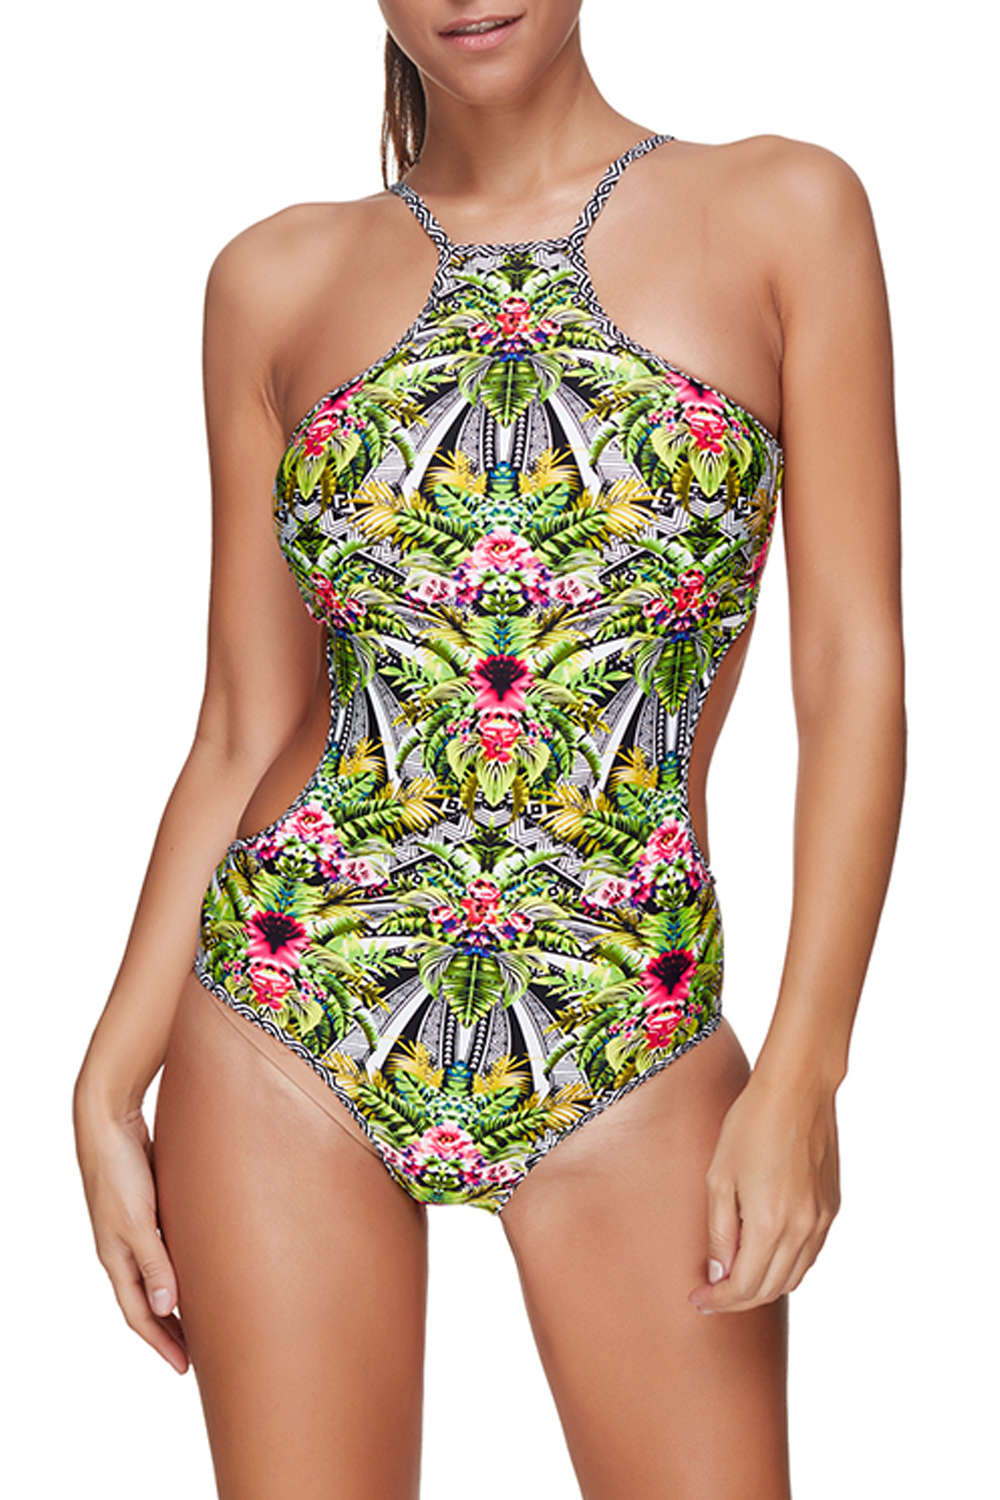 Iyasson Tropical Floral Printing High Neckline One-piece Swimsuit